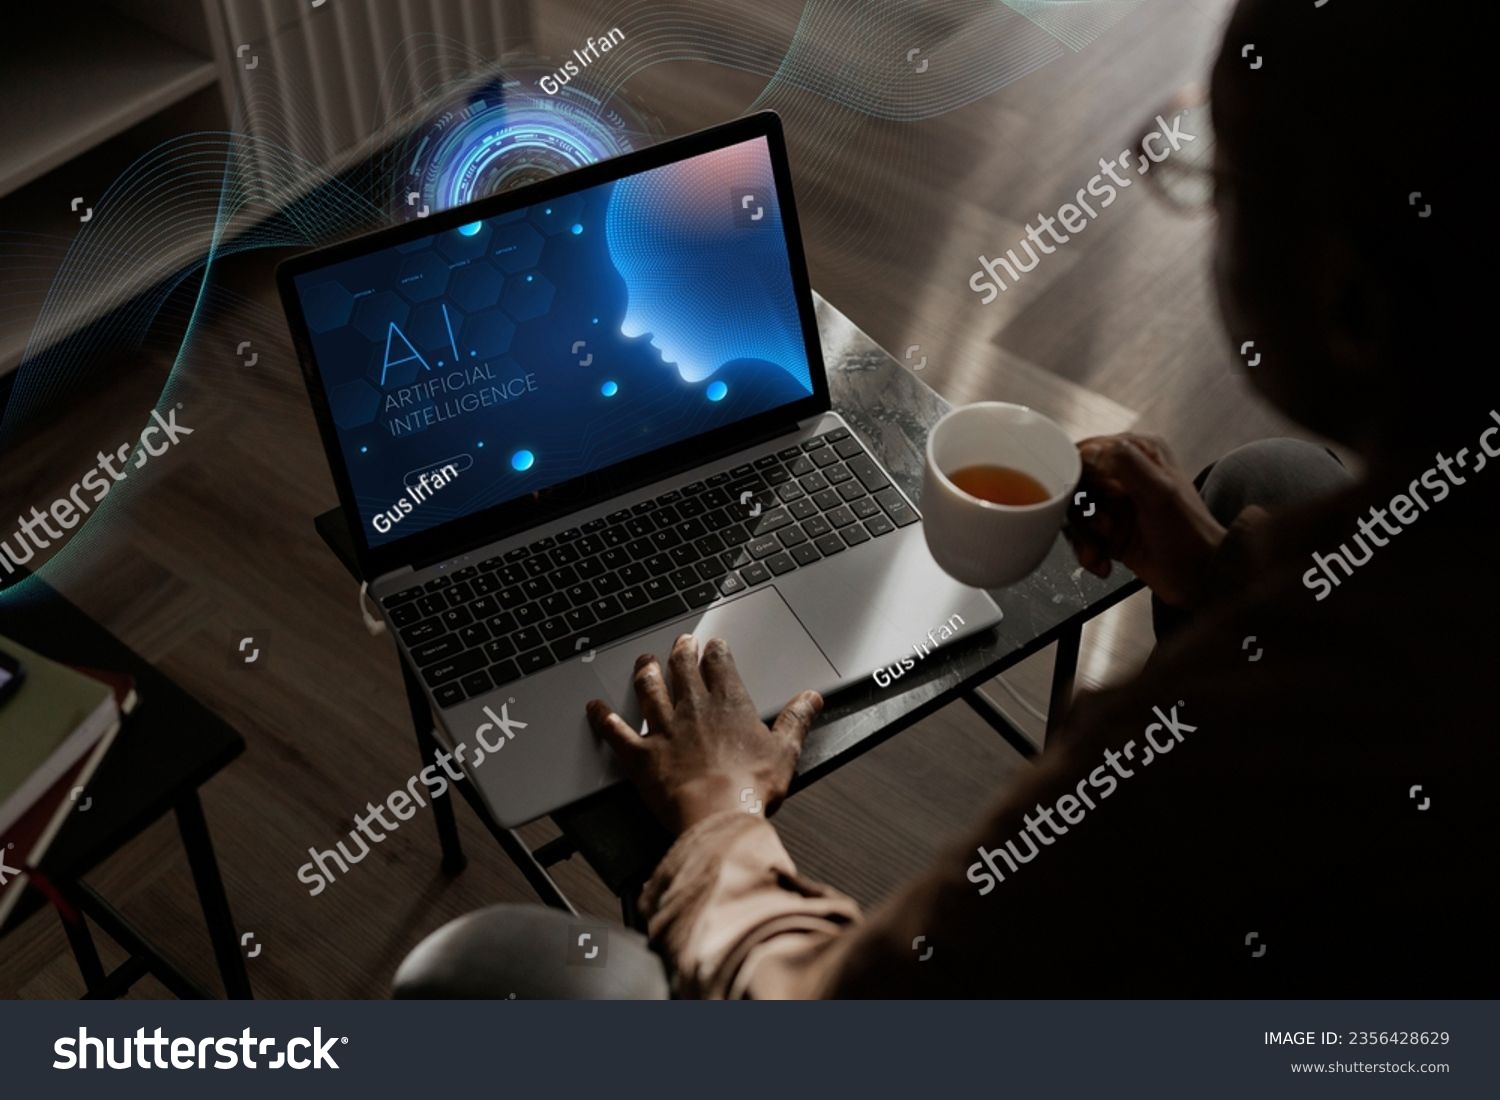 People generating images using artificial intelligence on laptop #2356428629